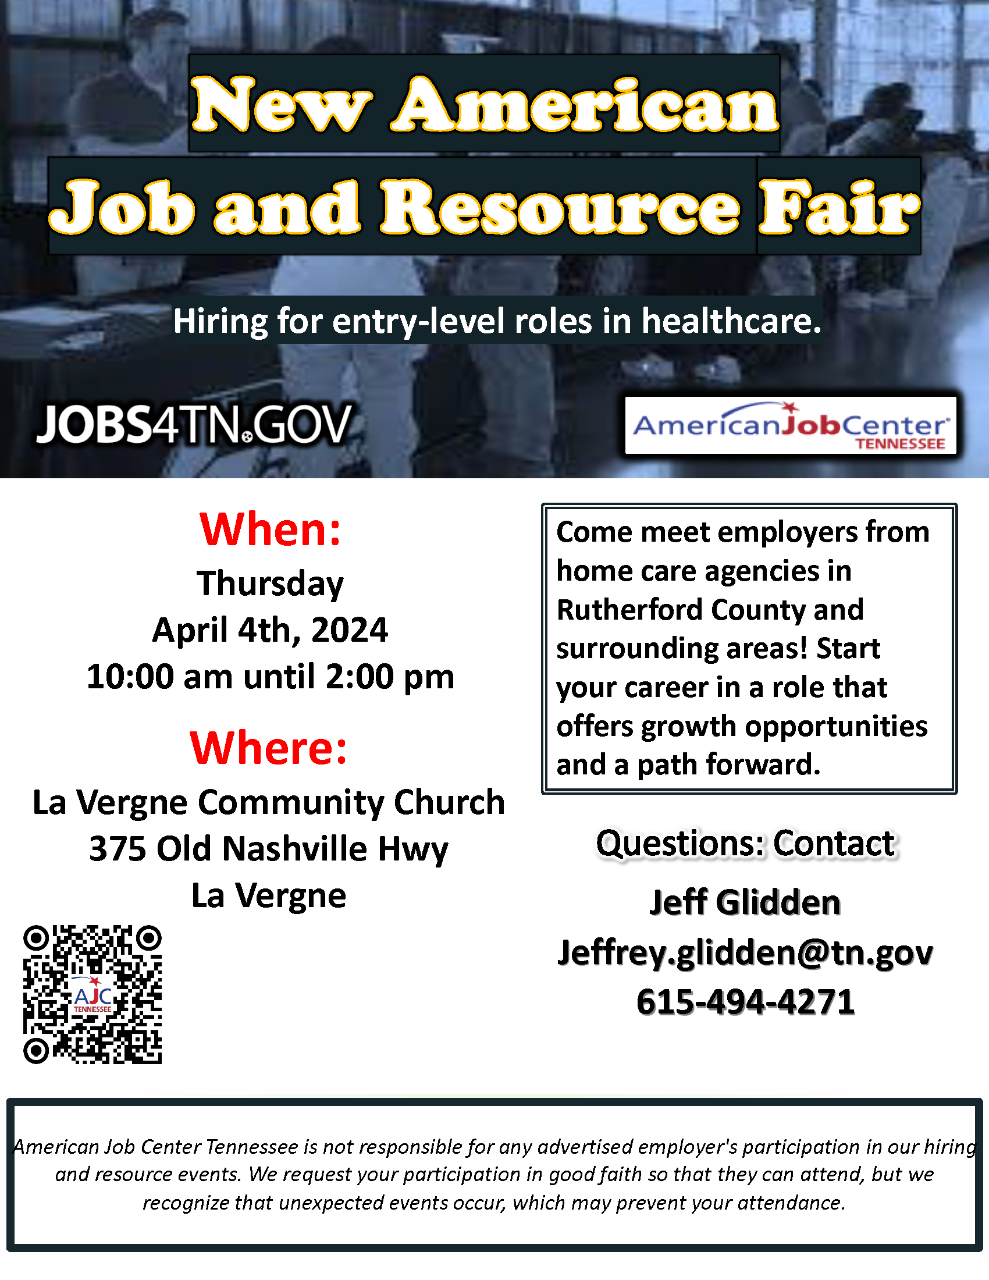 New American Job and Resource Fair in Rutherford County TN